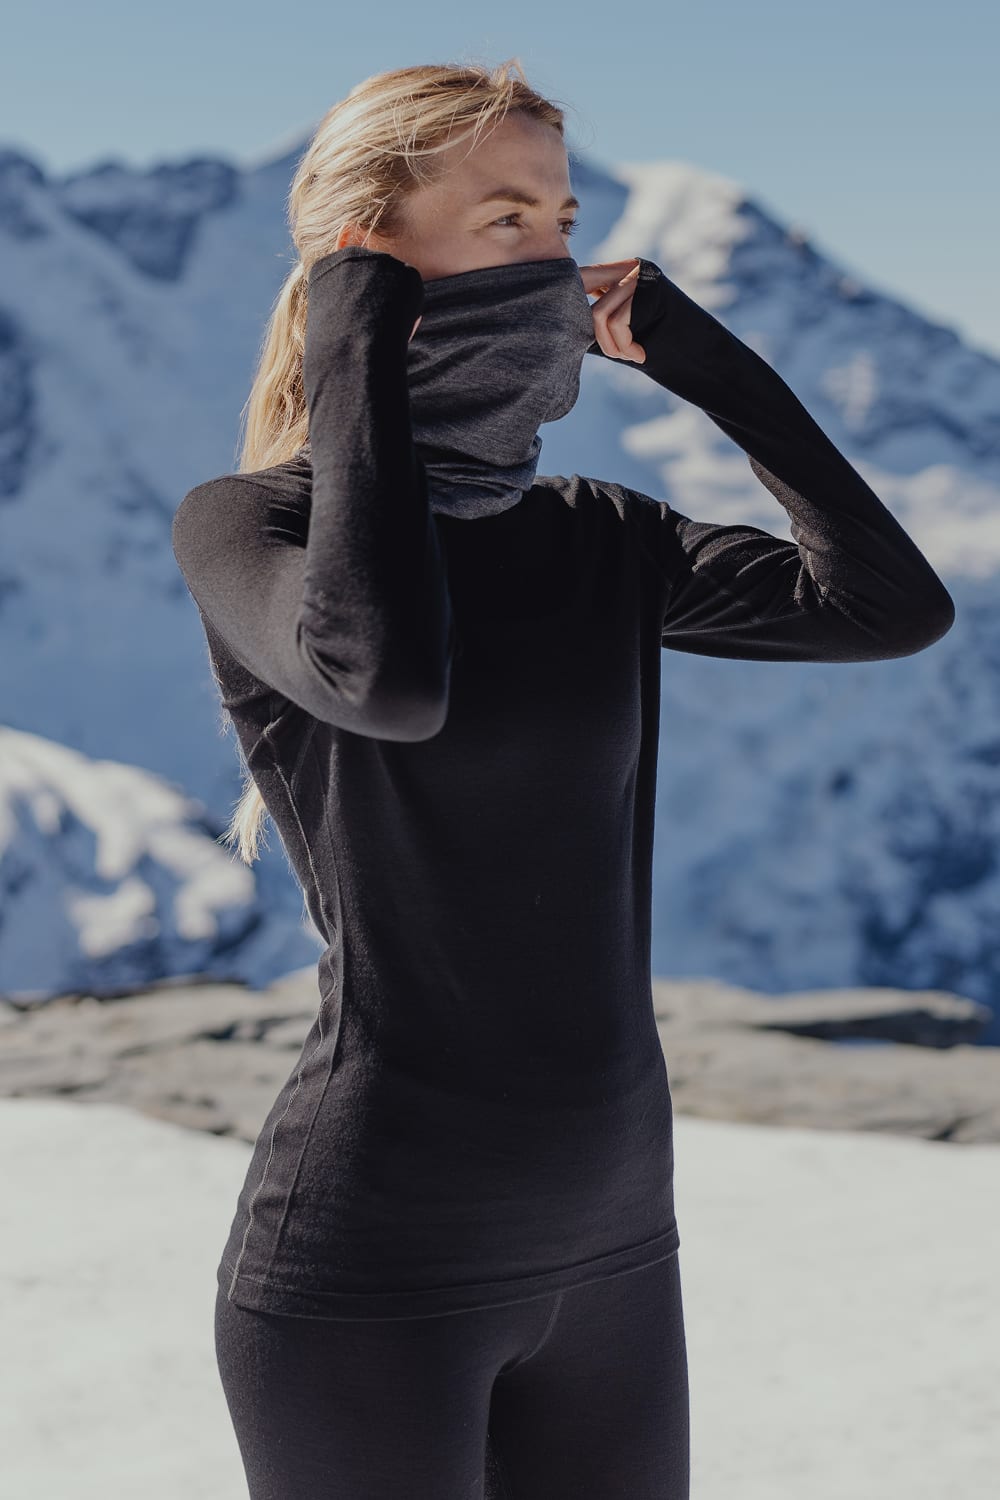 Women standing on the mountain wearing Base Layers